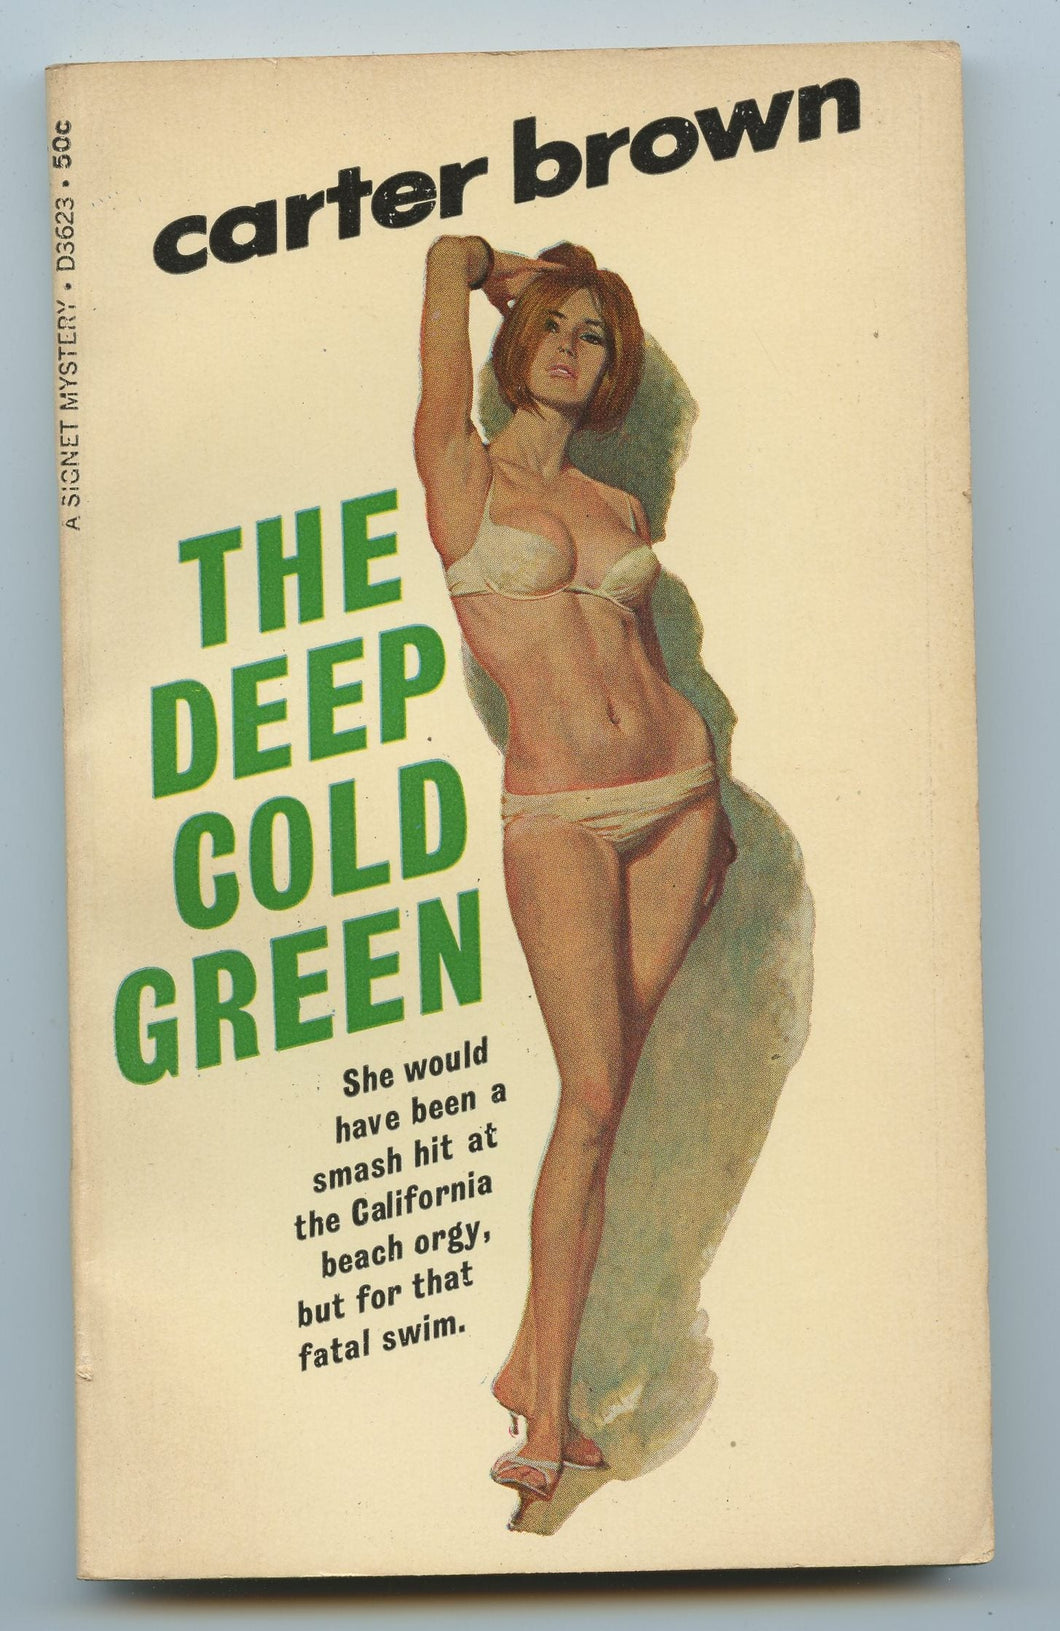 The Deep Cold Green